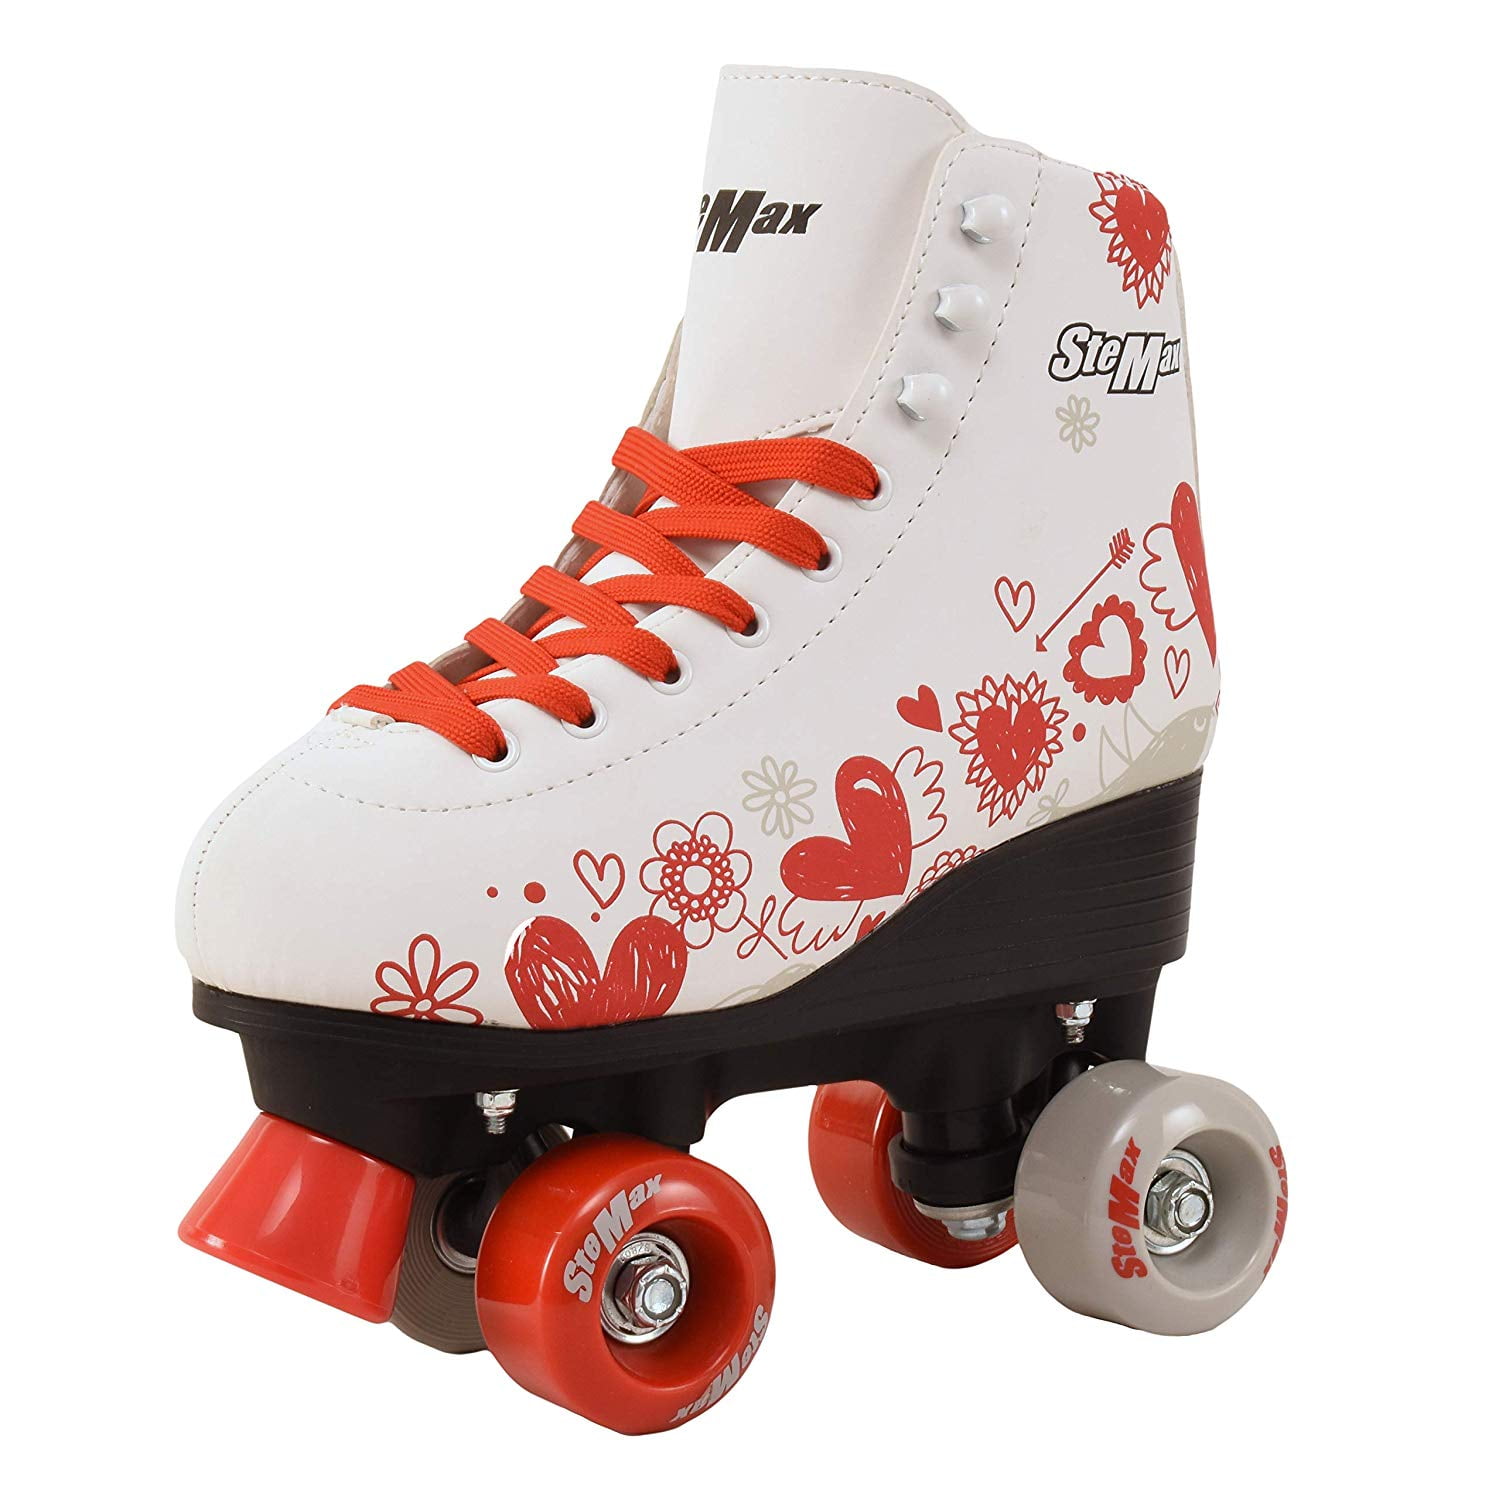 Roller Skates Women Outdoor,Indoor Outdoor Roller Skates for Teens and Youth,Adjustable Double Row Unisex Roller Skate White by Bosmy